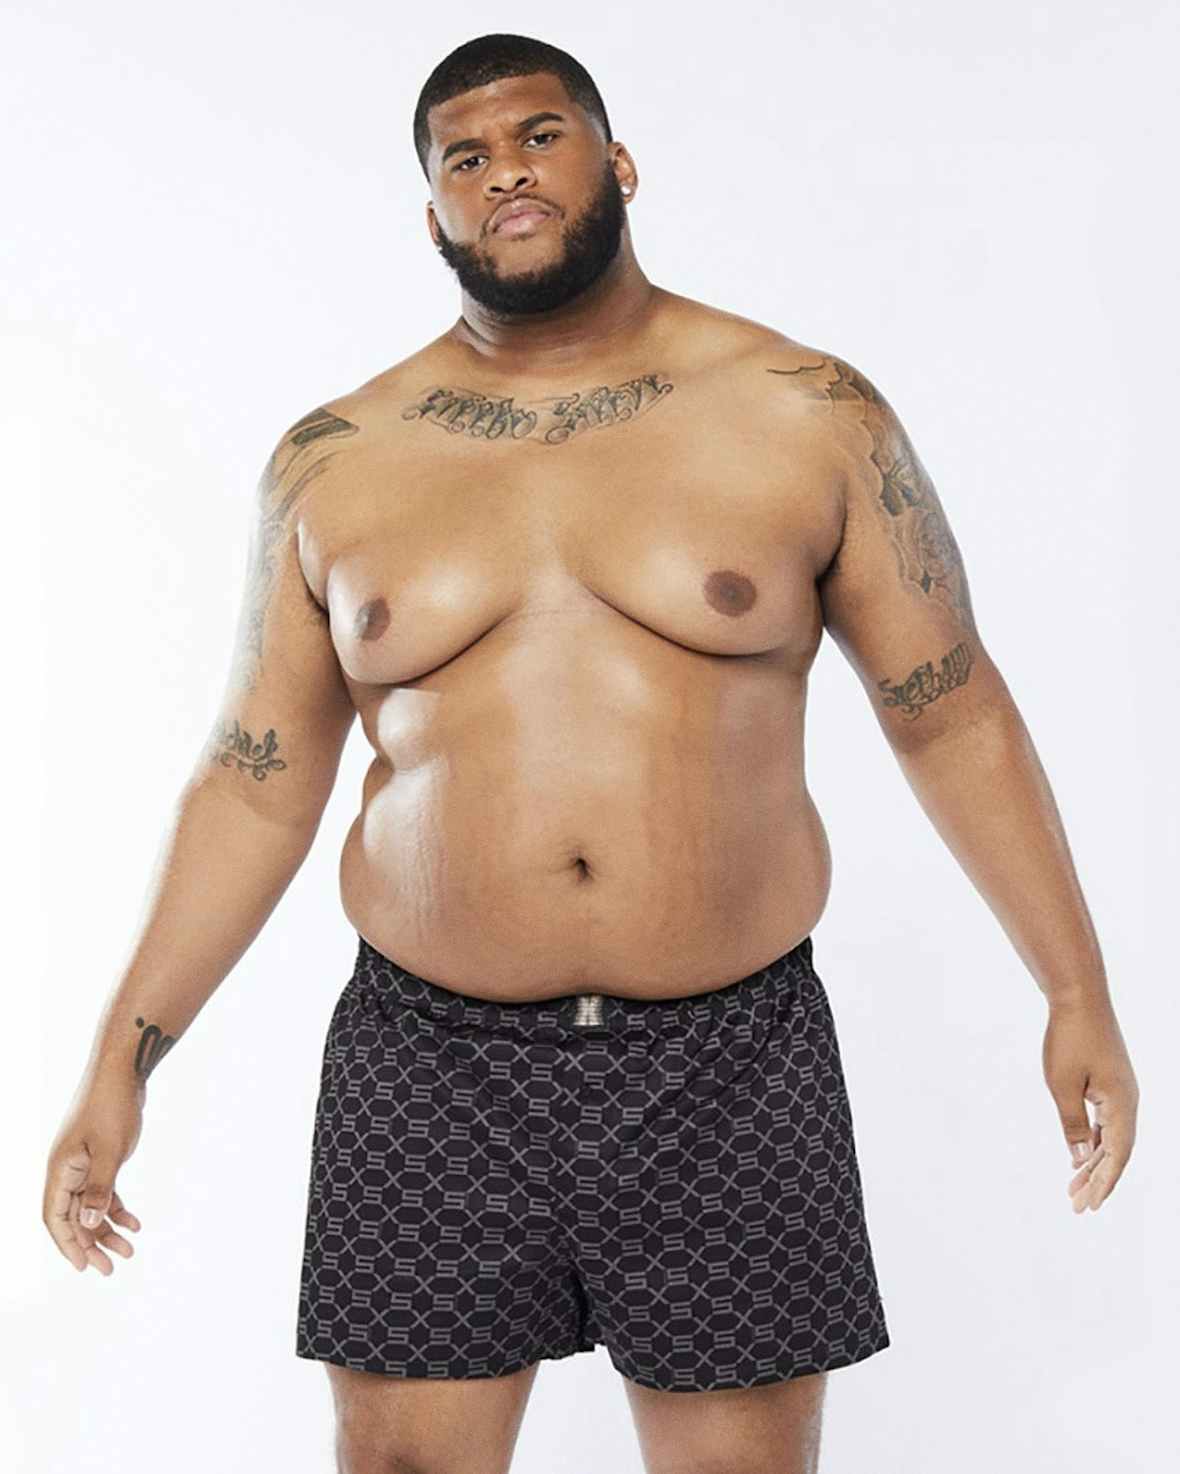 Plus-size male model breaks the norms and celebrates body positivity, The  Independent